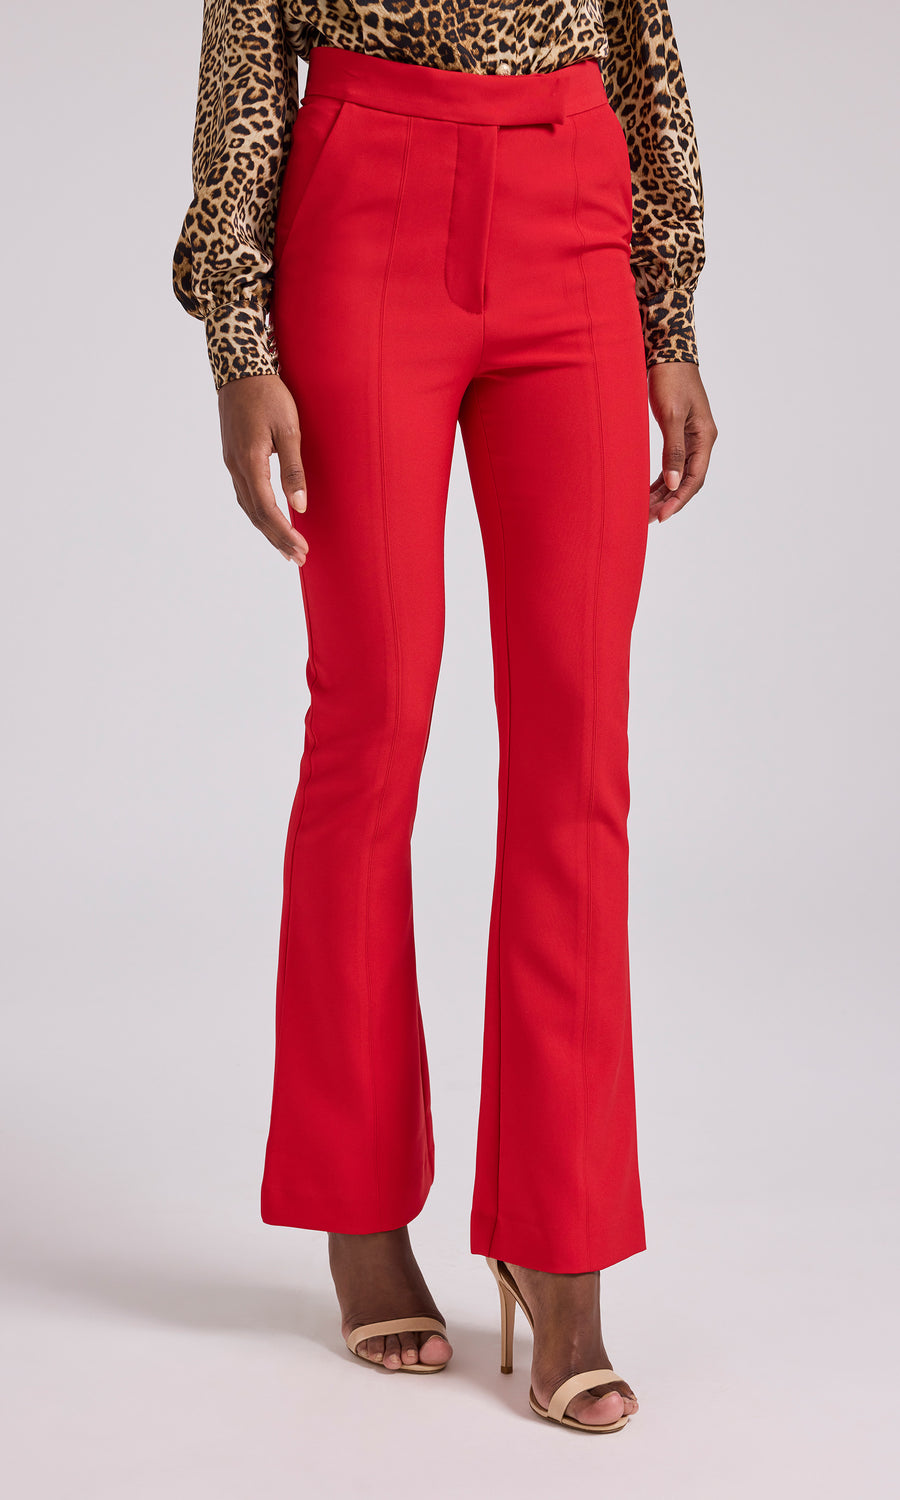 Lucca Crepe Pants - Red